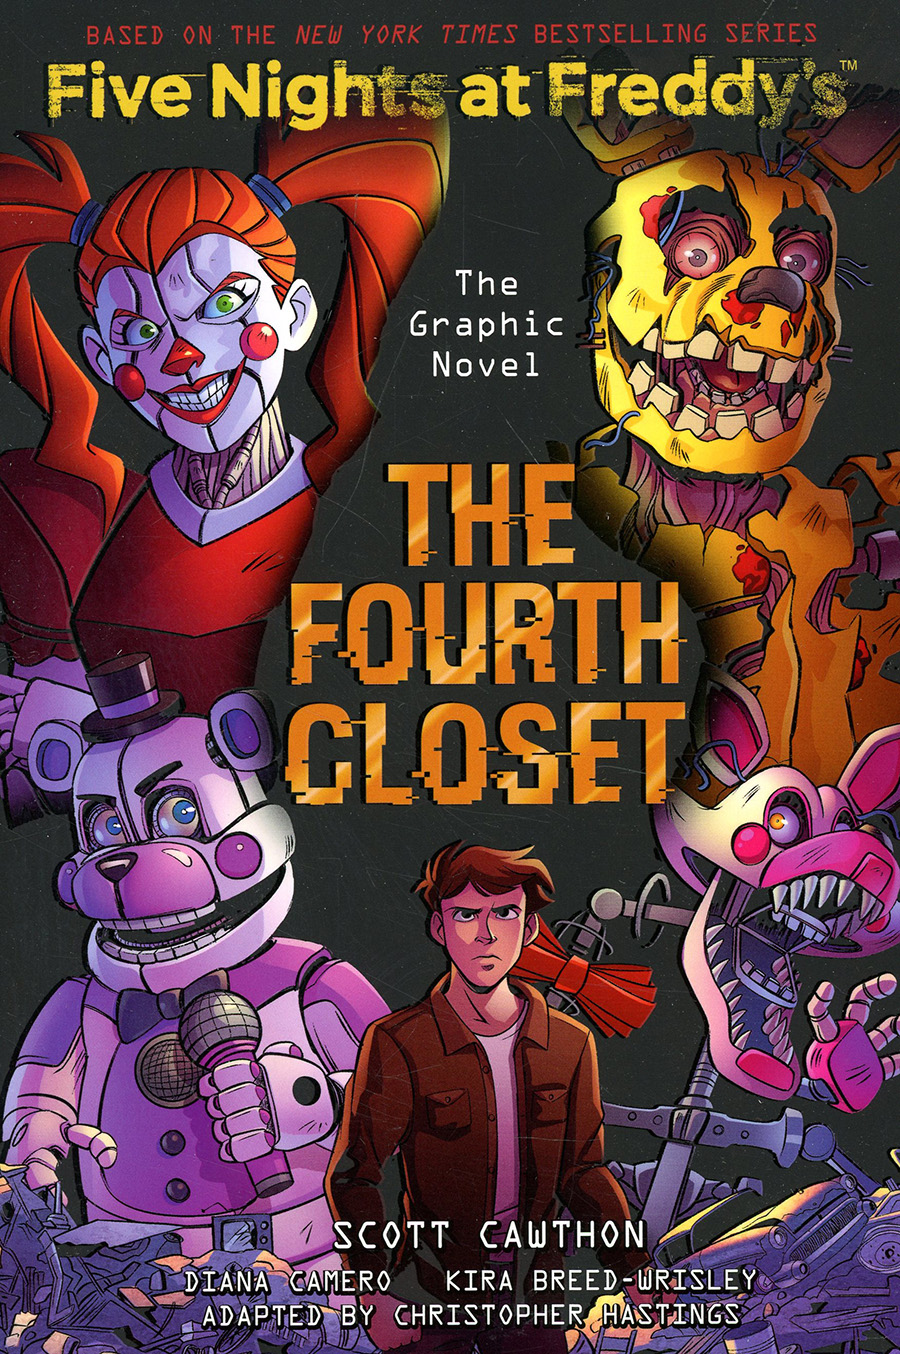 Five Nights At Freddys The Graphic Novel Vol 3 Fourth Closet TP